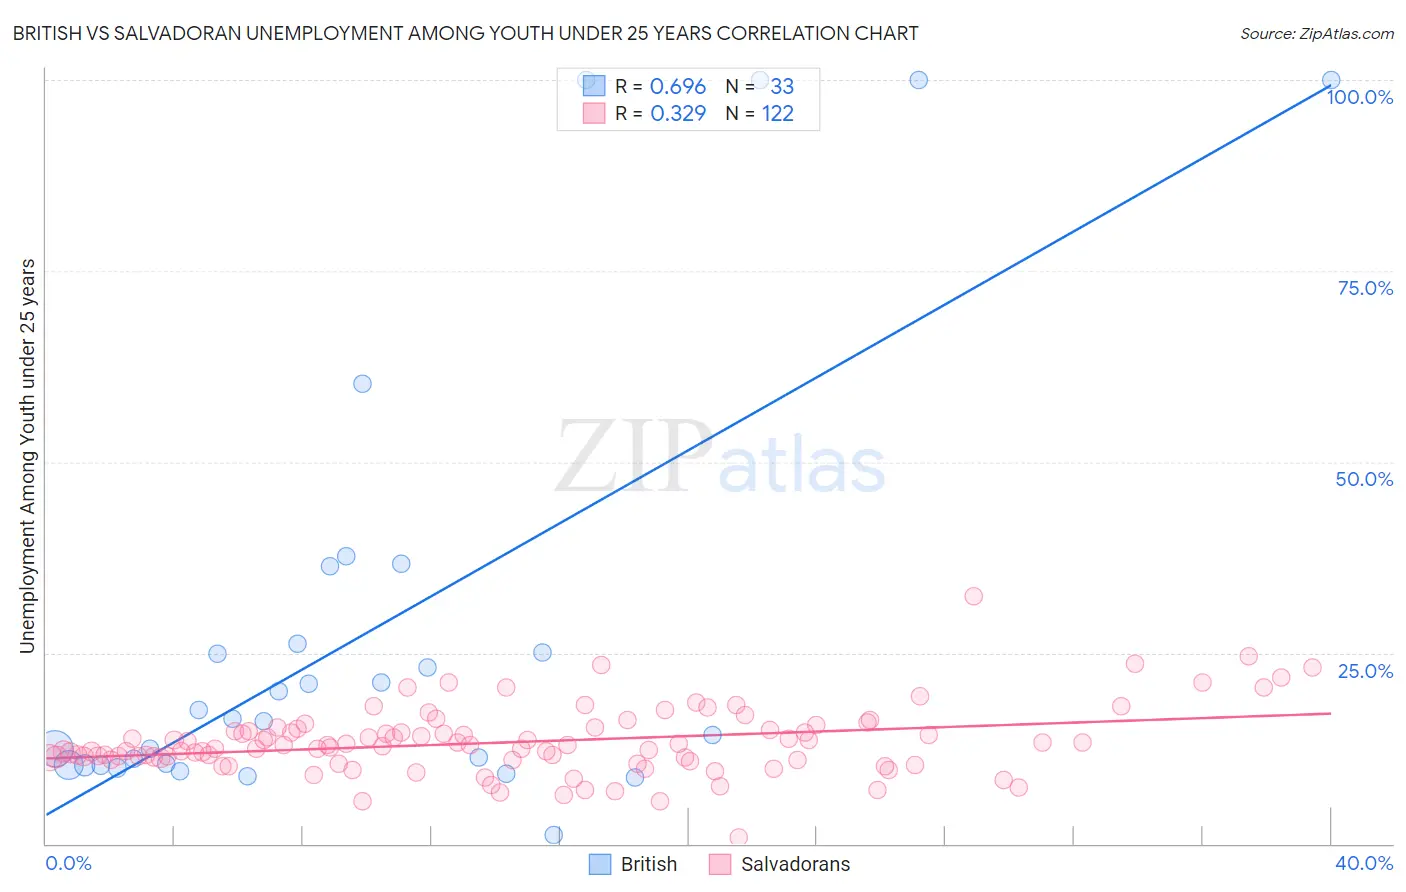 British vs Salvadoran Unemployment Among Youth under 25 years